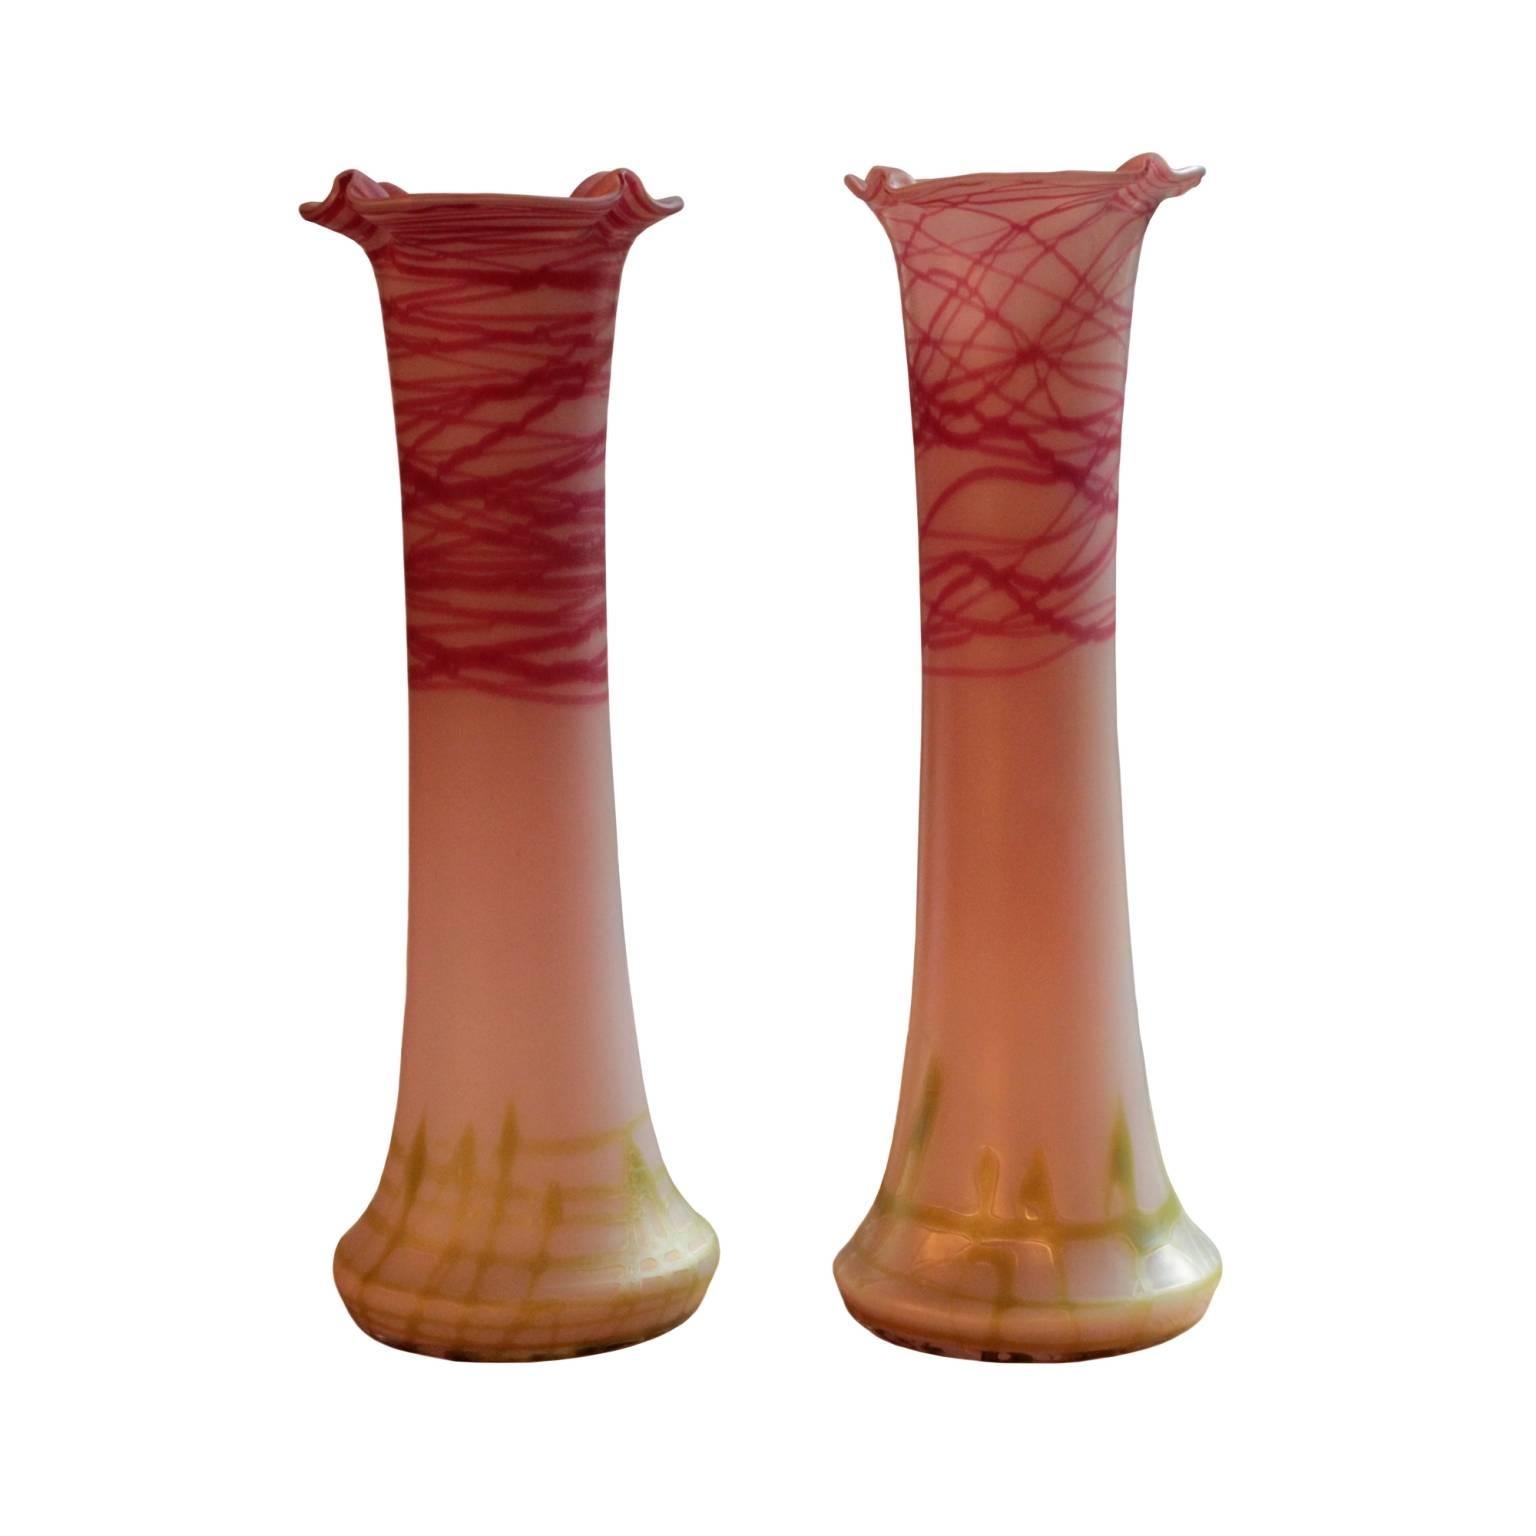 Slim and narrow bodies in colorless glass with wide pinched mouths featuring molded rims; decorated with beautiful raspberry red and light green liberally applied horizontal and vertical patterns. Made by Glasfabrik Elisabeth (or Pallme-Koenig),